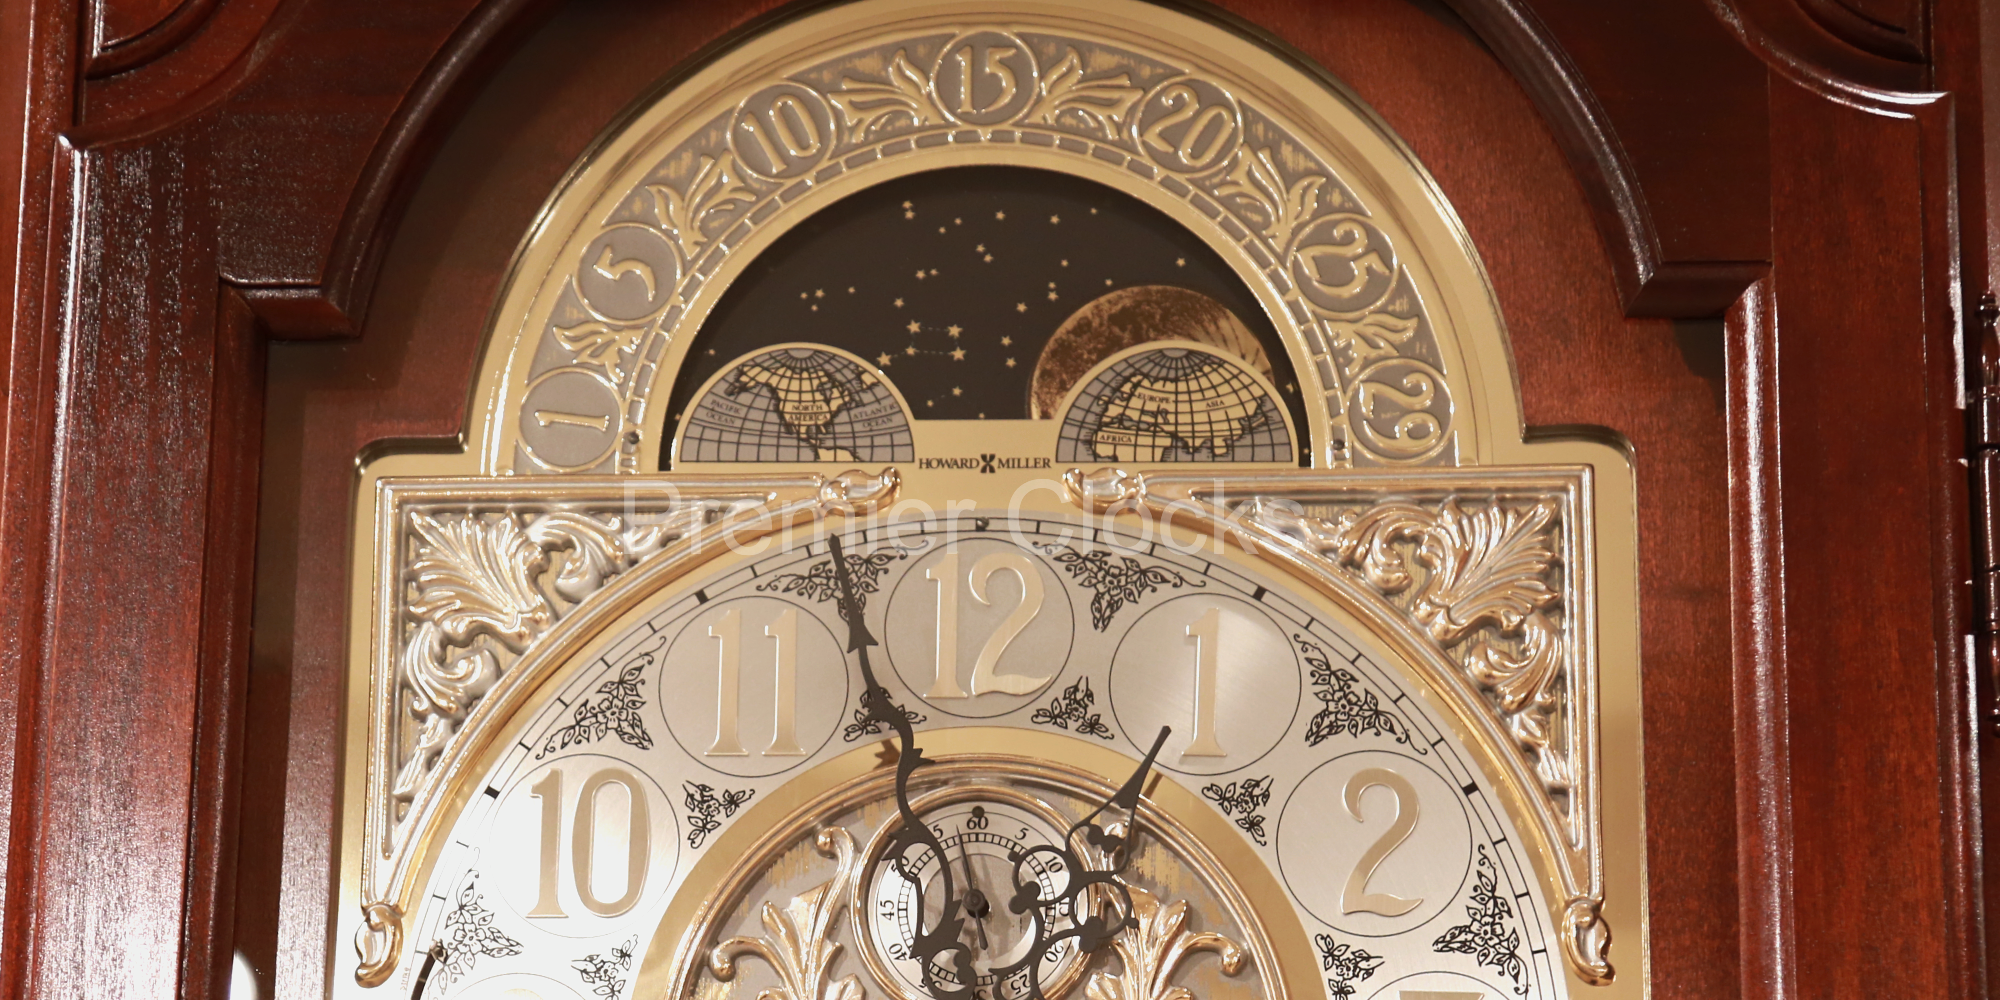 How to Set a Moon Dial on a Grandfather Clock